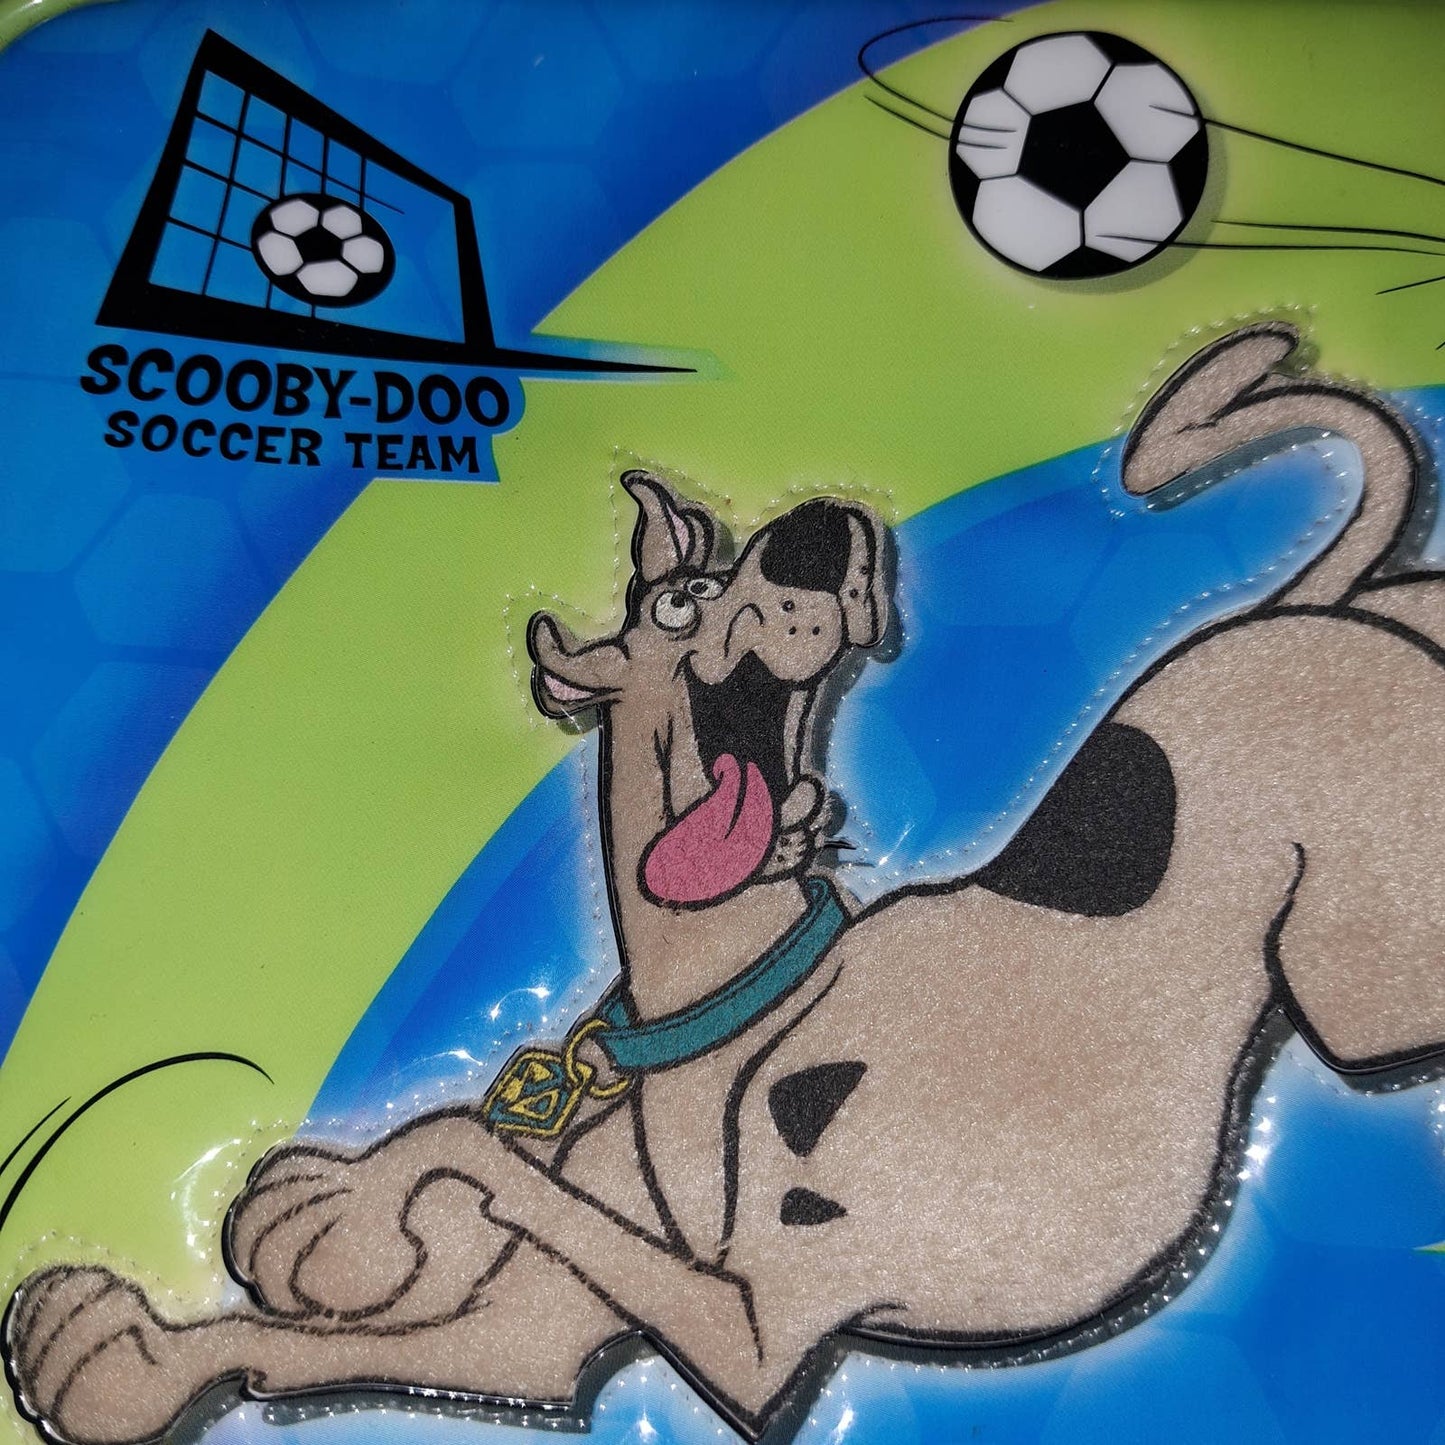 Brand New Scooby-Doo Soccer Team Thermos Lunchbox-Thermos